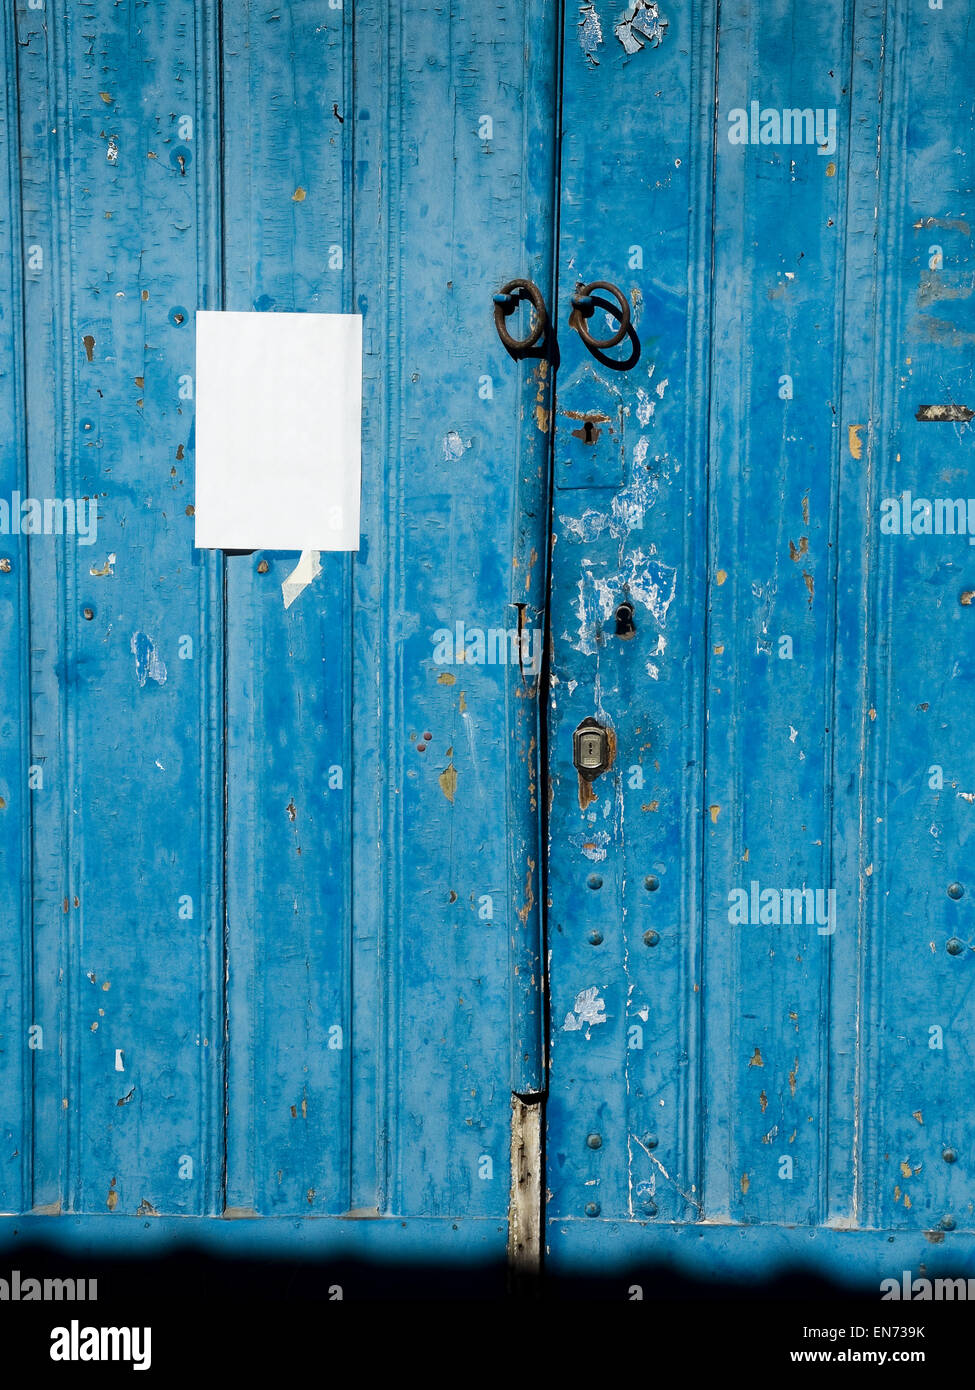 Antique blue wooden door with a paper in blank. Stock Photo